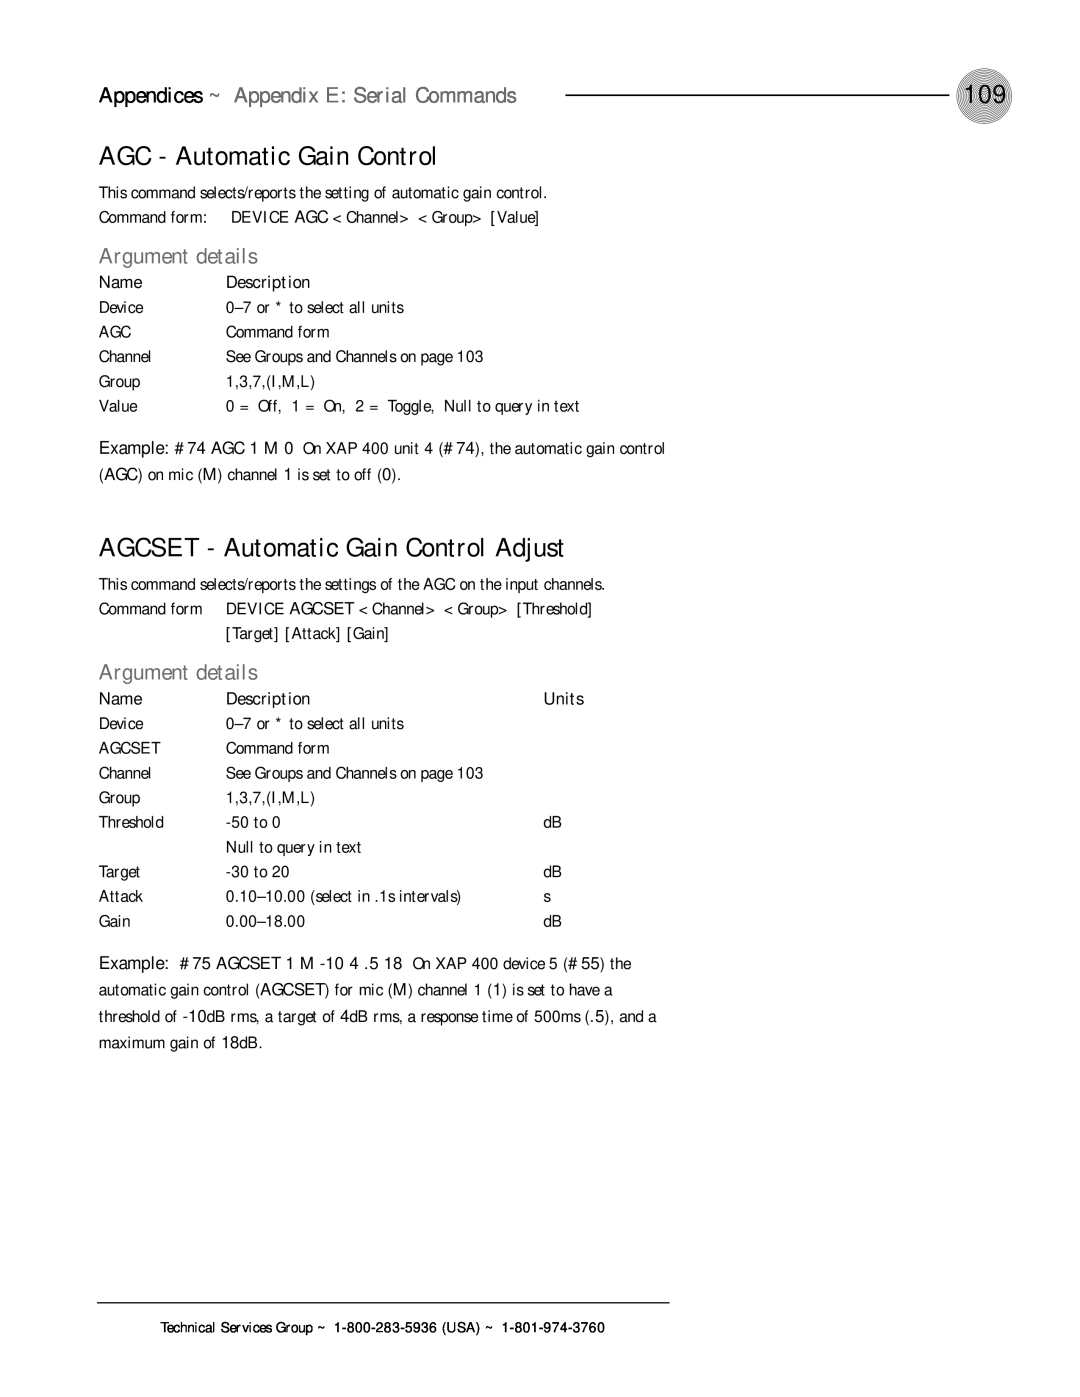 ClearOne comm XAP 400 AGC - Automatic Gain Control, AGCSET - Automatic Gain Control Adjust, Argument details, Name 